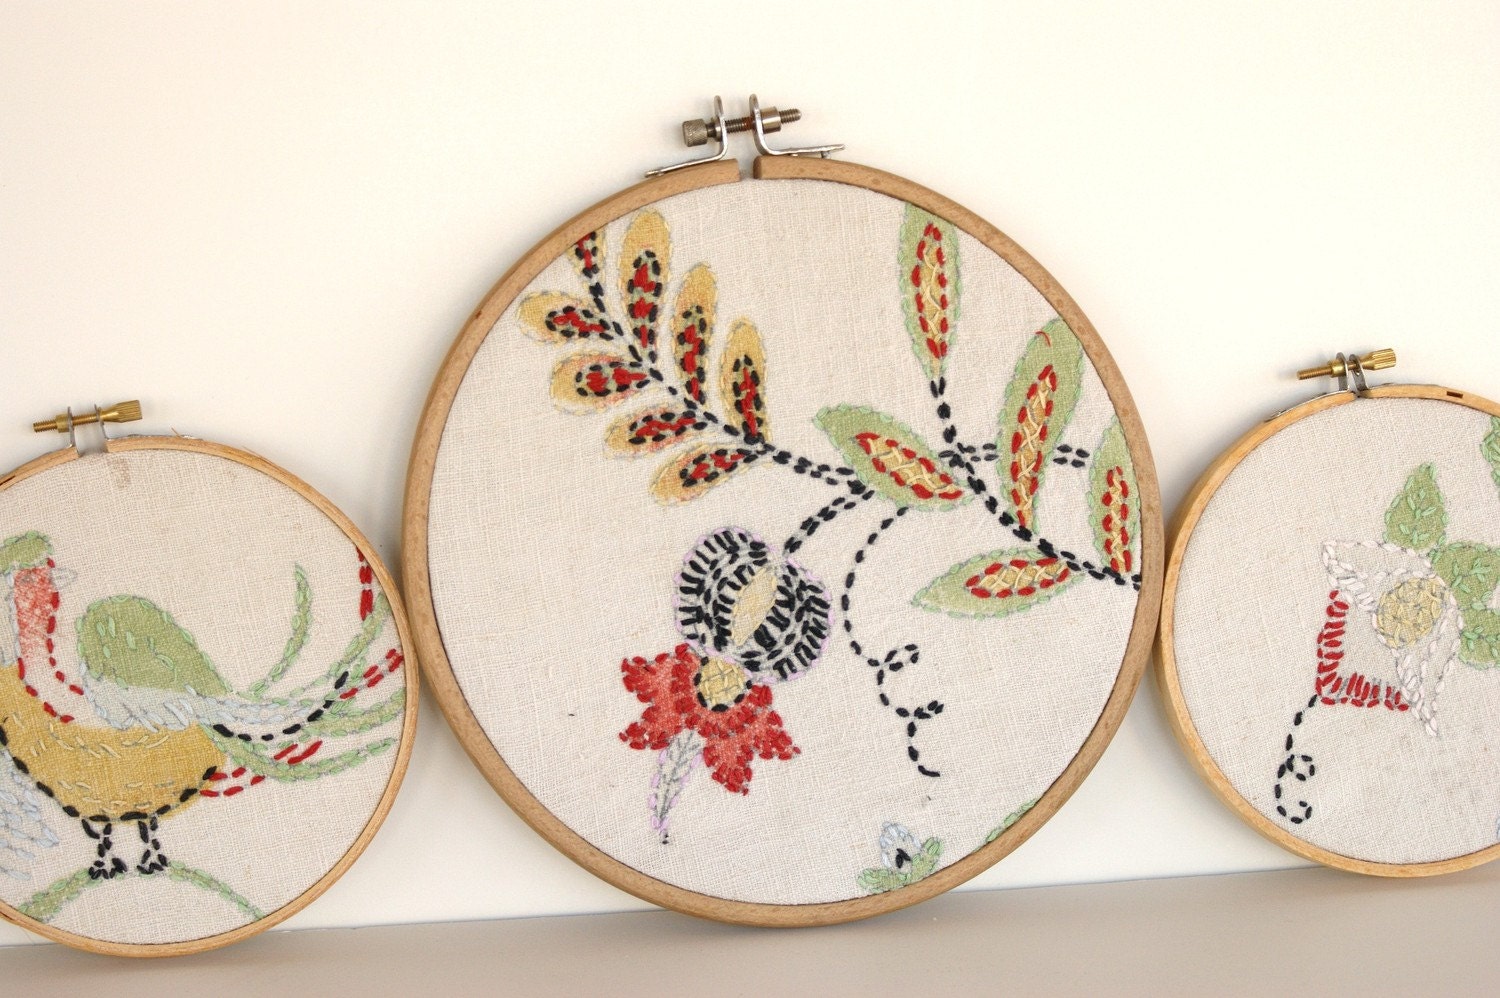 Vintage Set of 3 Embroidery Needlepoint Fabric Hoop Wall Hanging Cotton Flowers Bird Shabby Chic by LeeLeescloset on Etsy